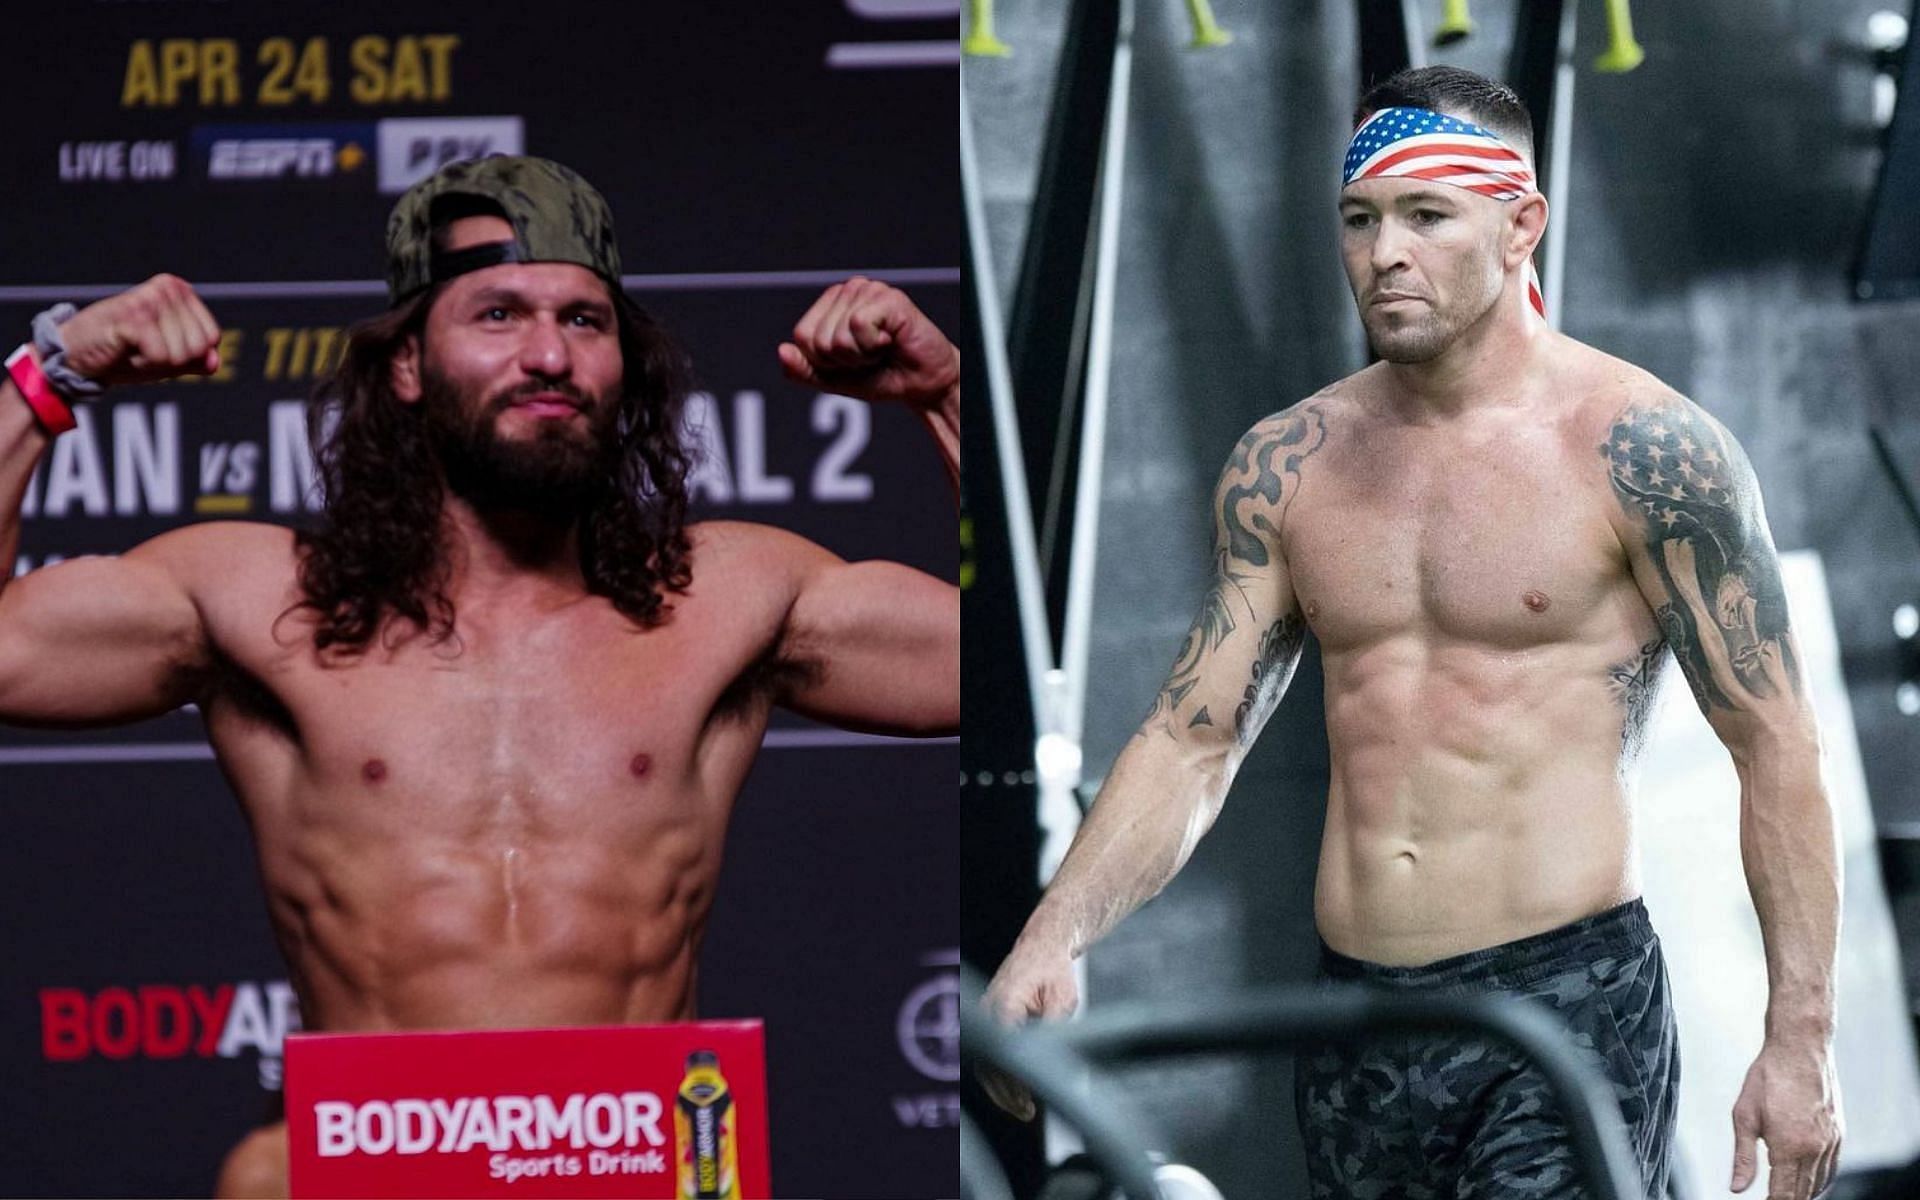 Jorge Masvidal (left) and Colby Covington (right) [Image Courtesy: @gamebredfighter and @colbycovmma on Instagram]